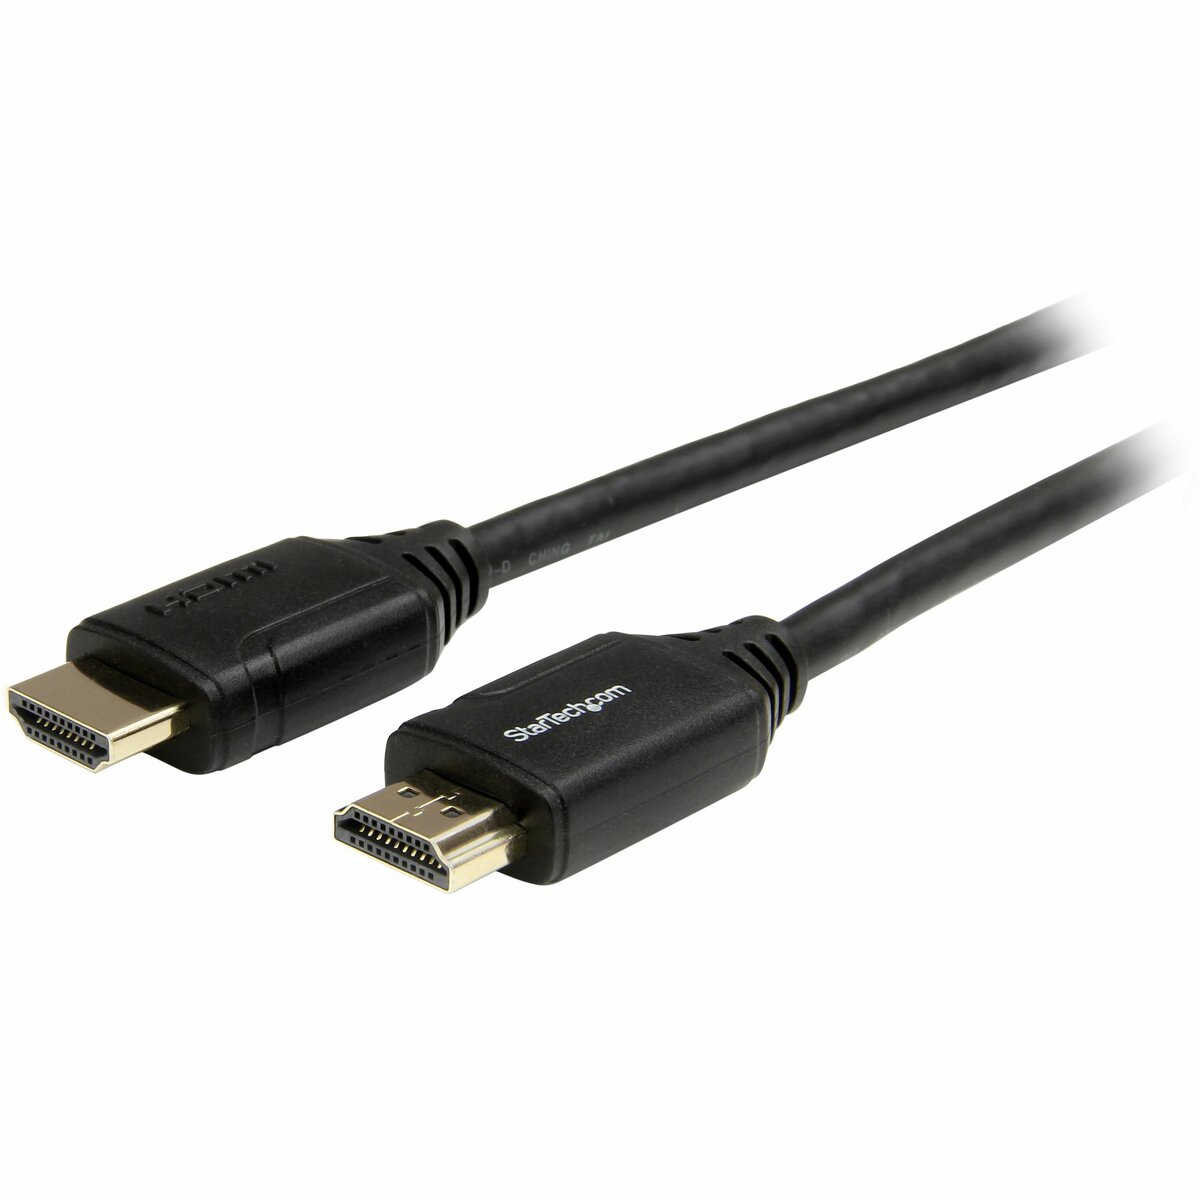 HDMI cable 3m 1080p version 1.4 heavy duty, male to male type A